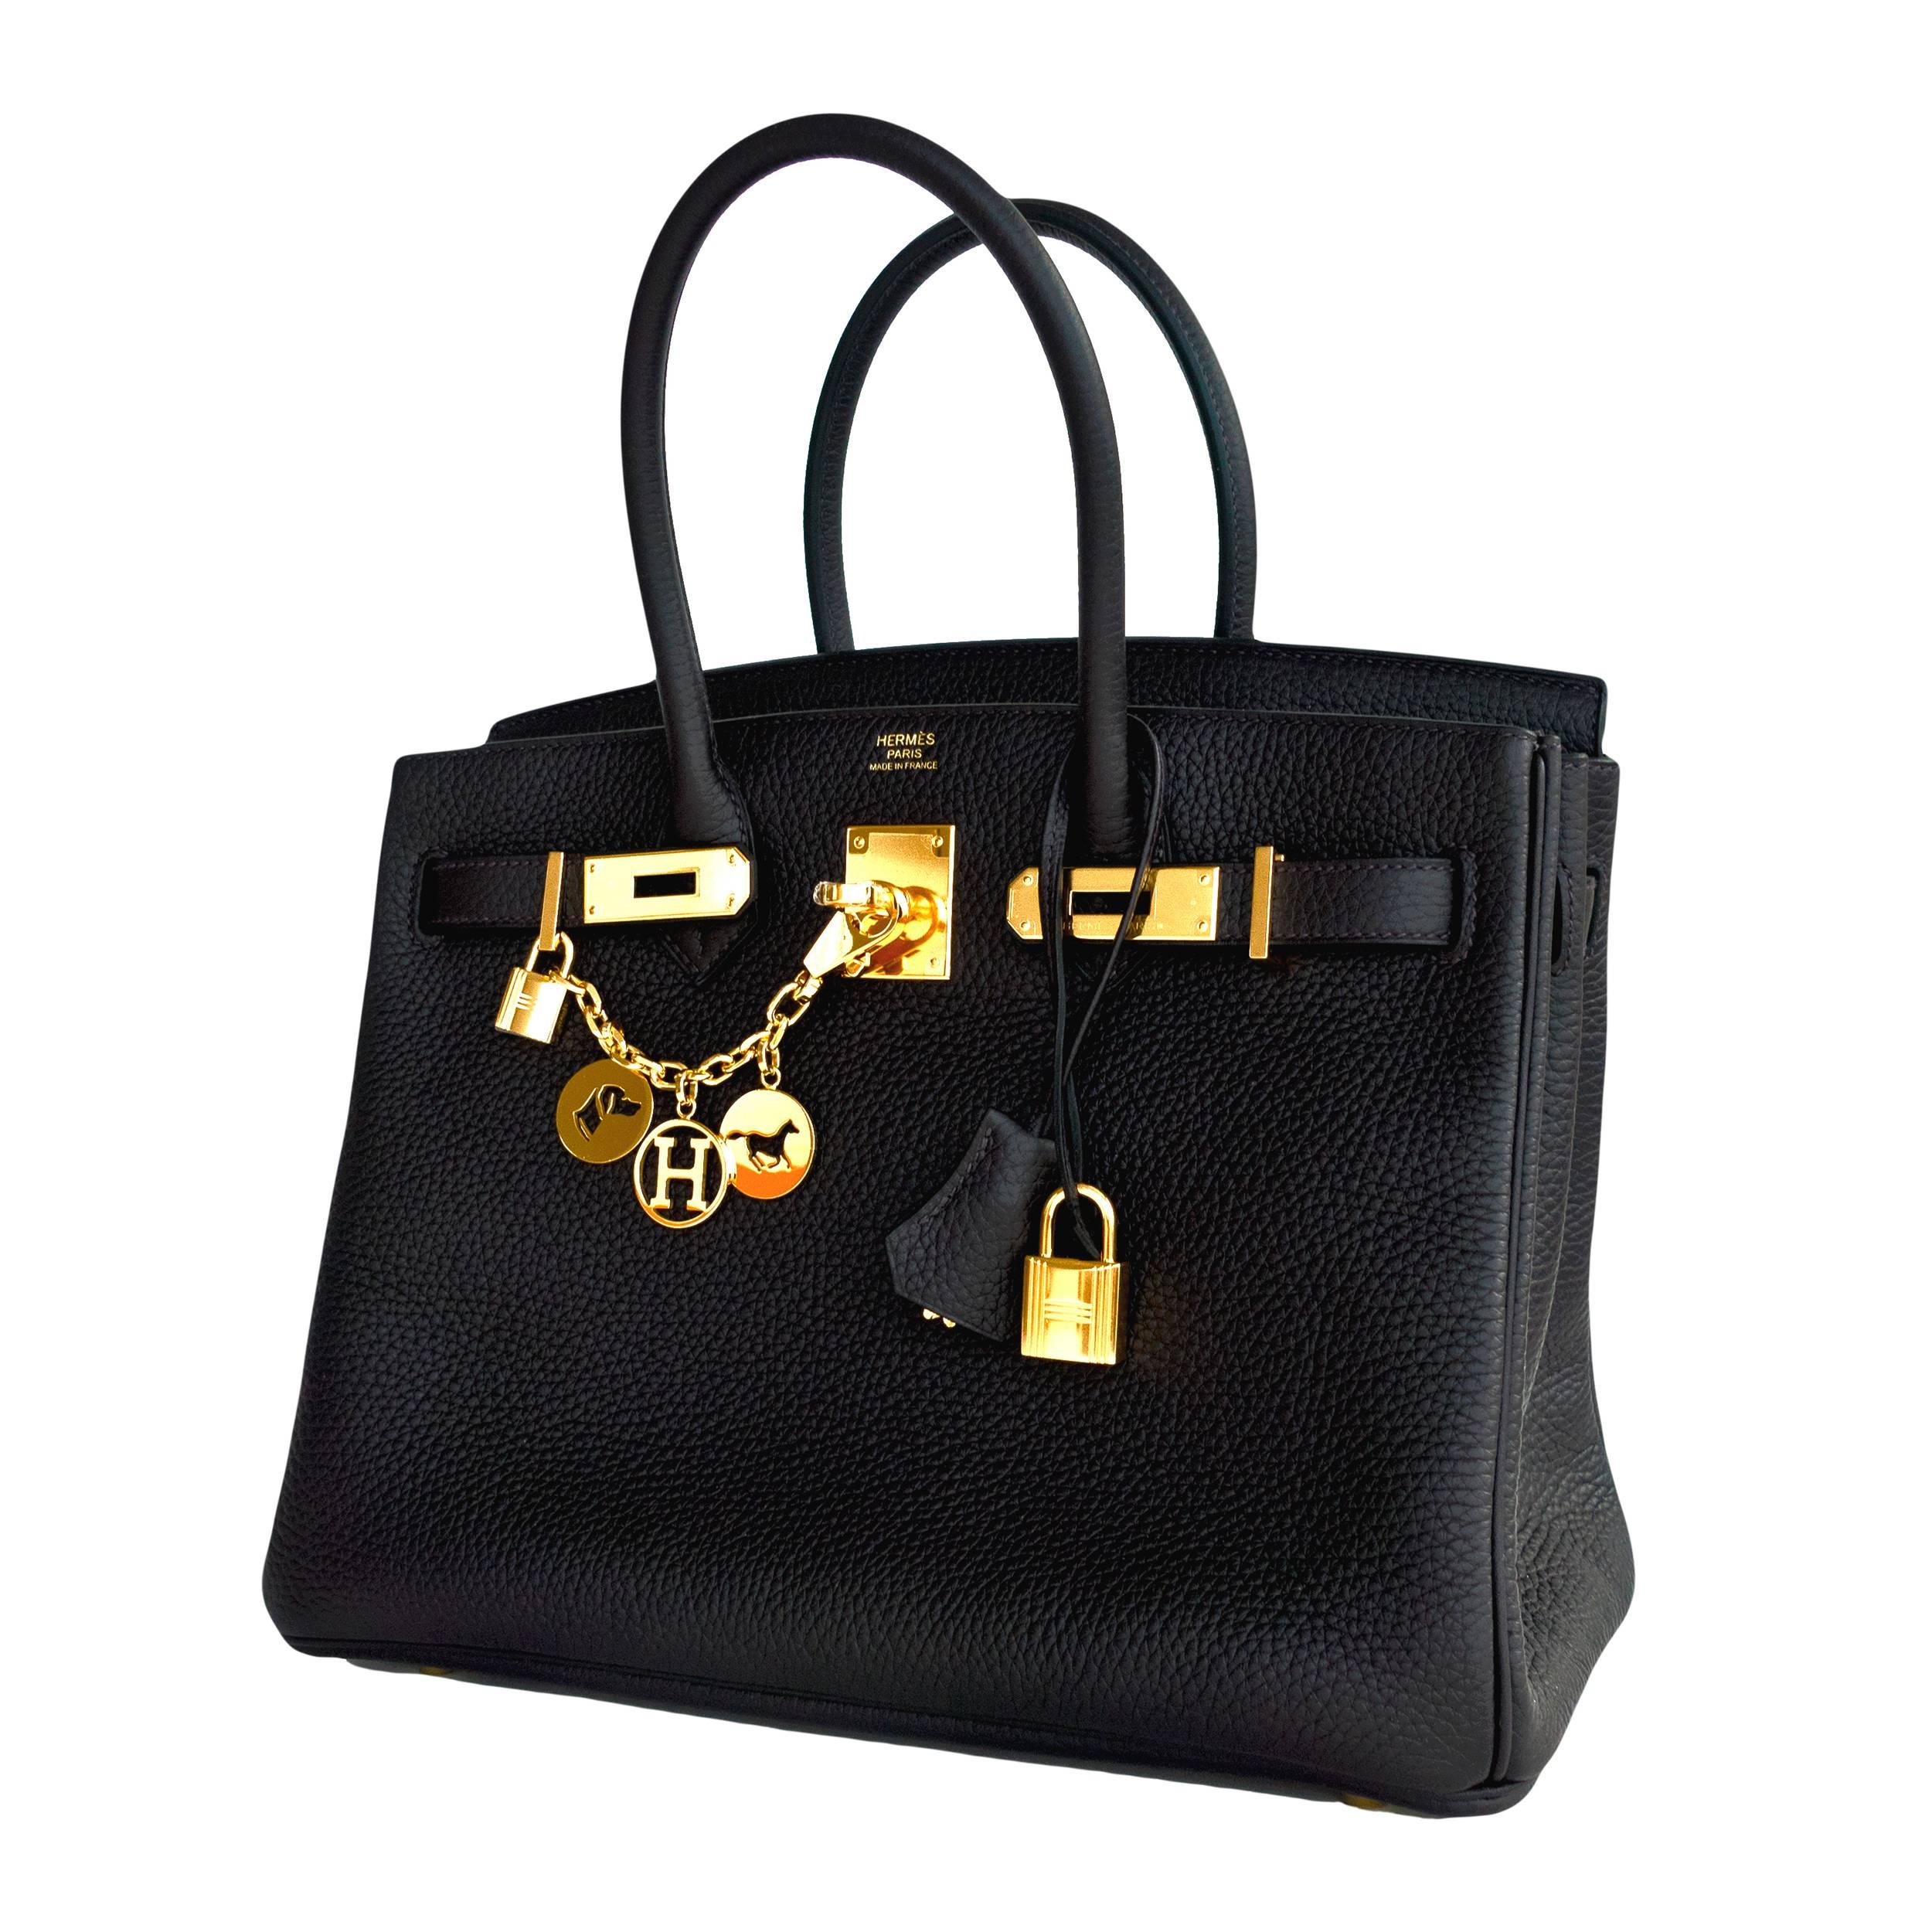 Store fresh. Pristine condition. T stamp.
Perfect gift! Comes with keys, lock, clochette, a sleeper for the bag, rain protector, Hermes ribbon, and original box. 
Prunoir is the latest off-black release from Hermes. 
A chamelon off-black that is